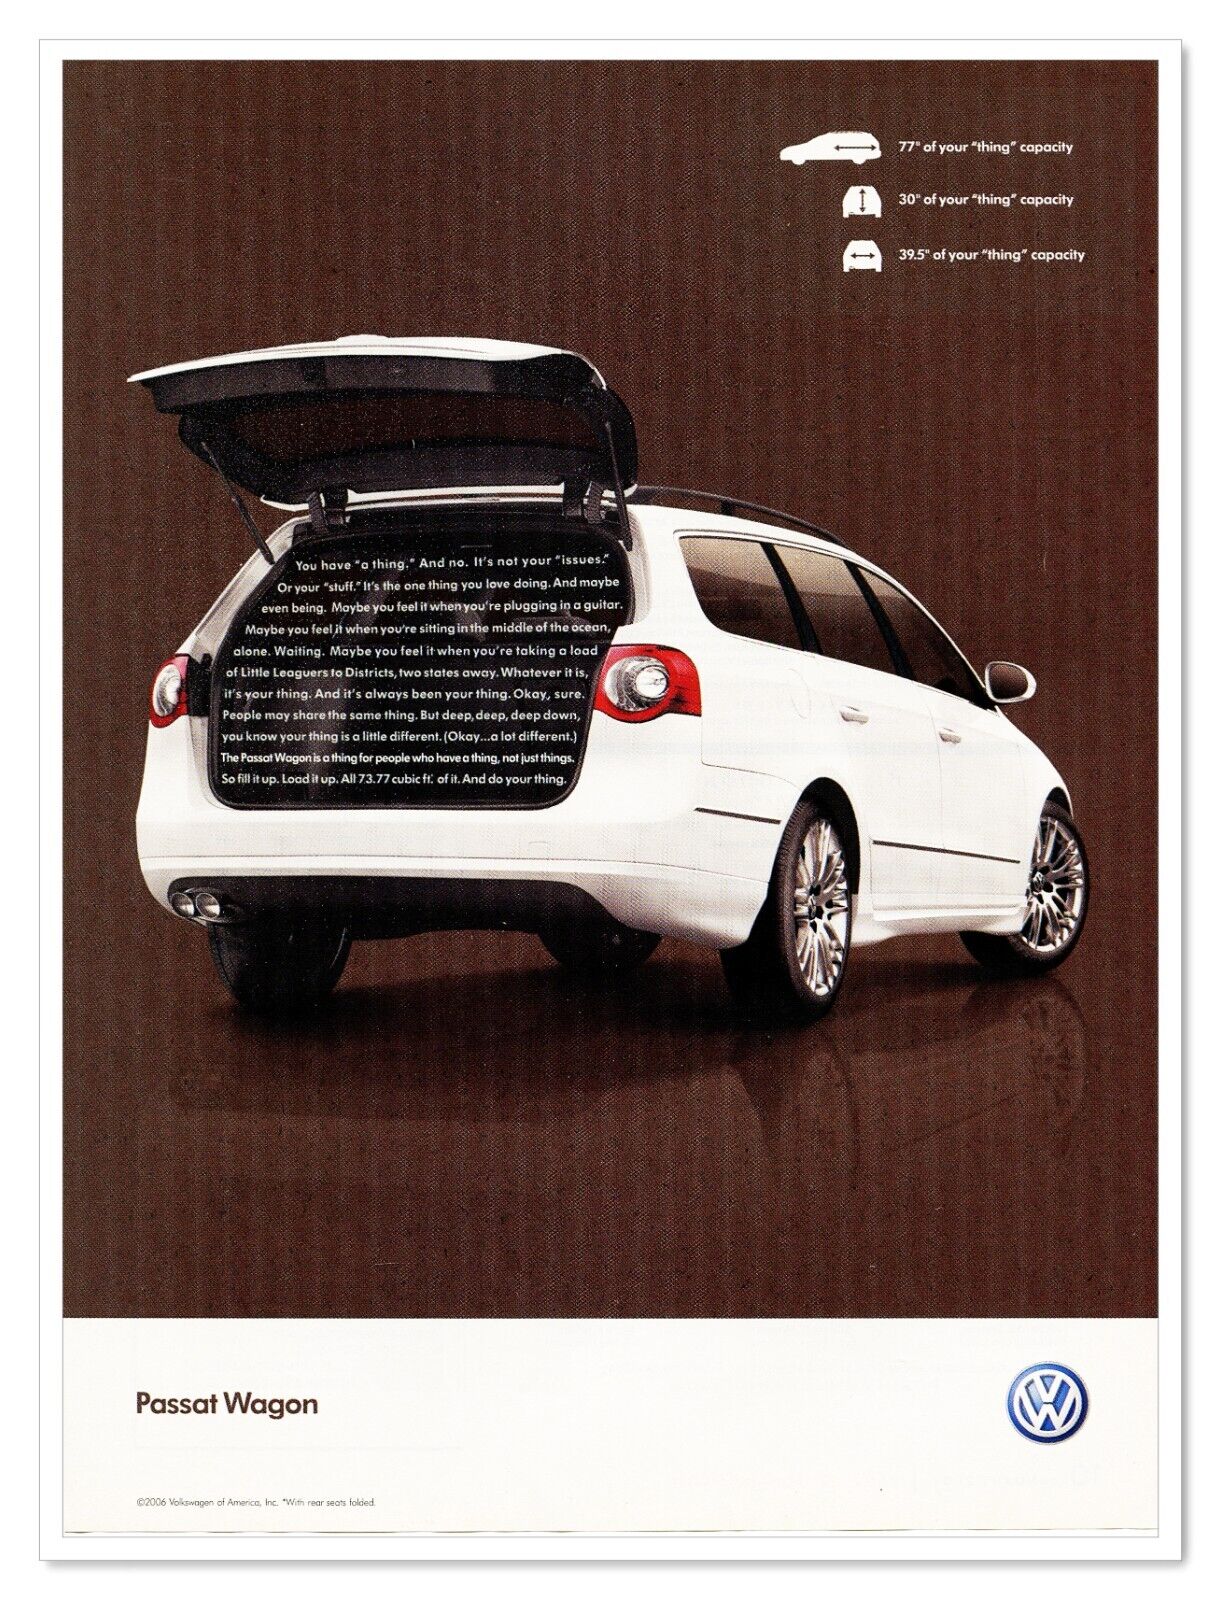 Volkswagen Passat Wagon People Who Have a Thing 2007 Full-Page Print Magazine Ad